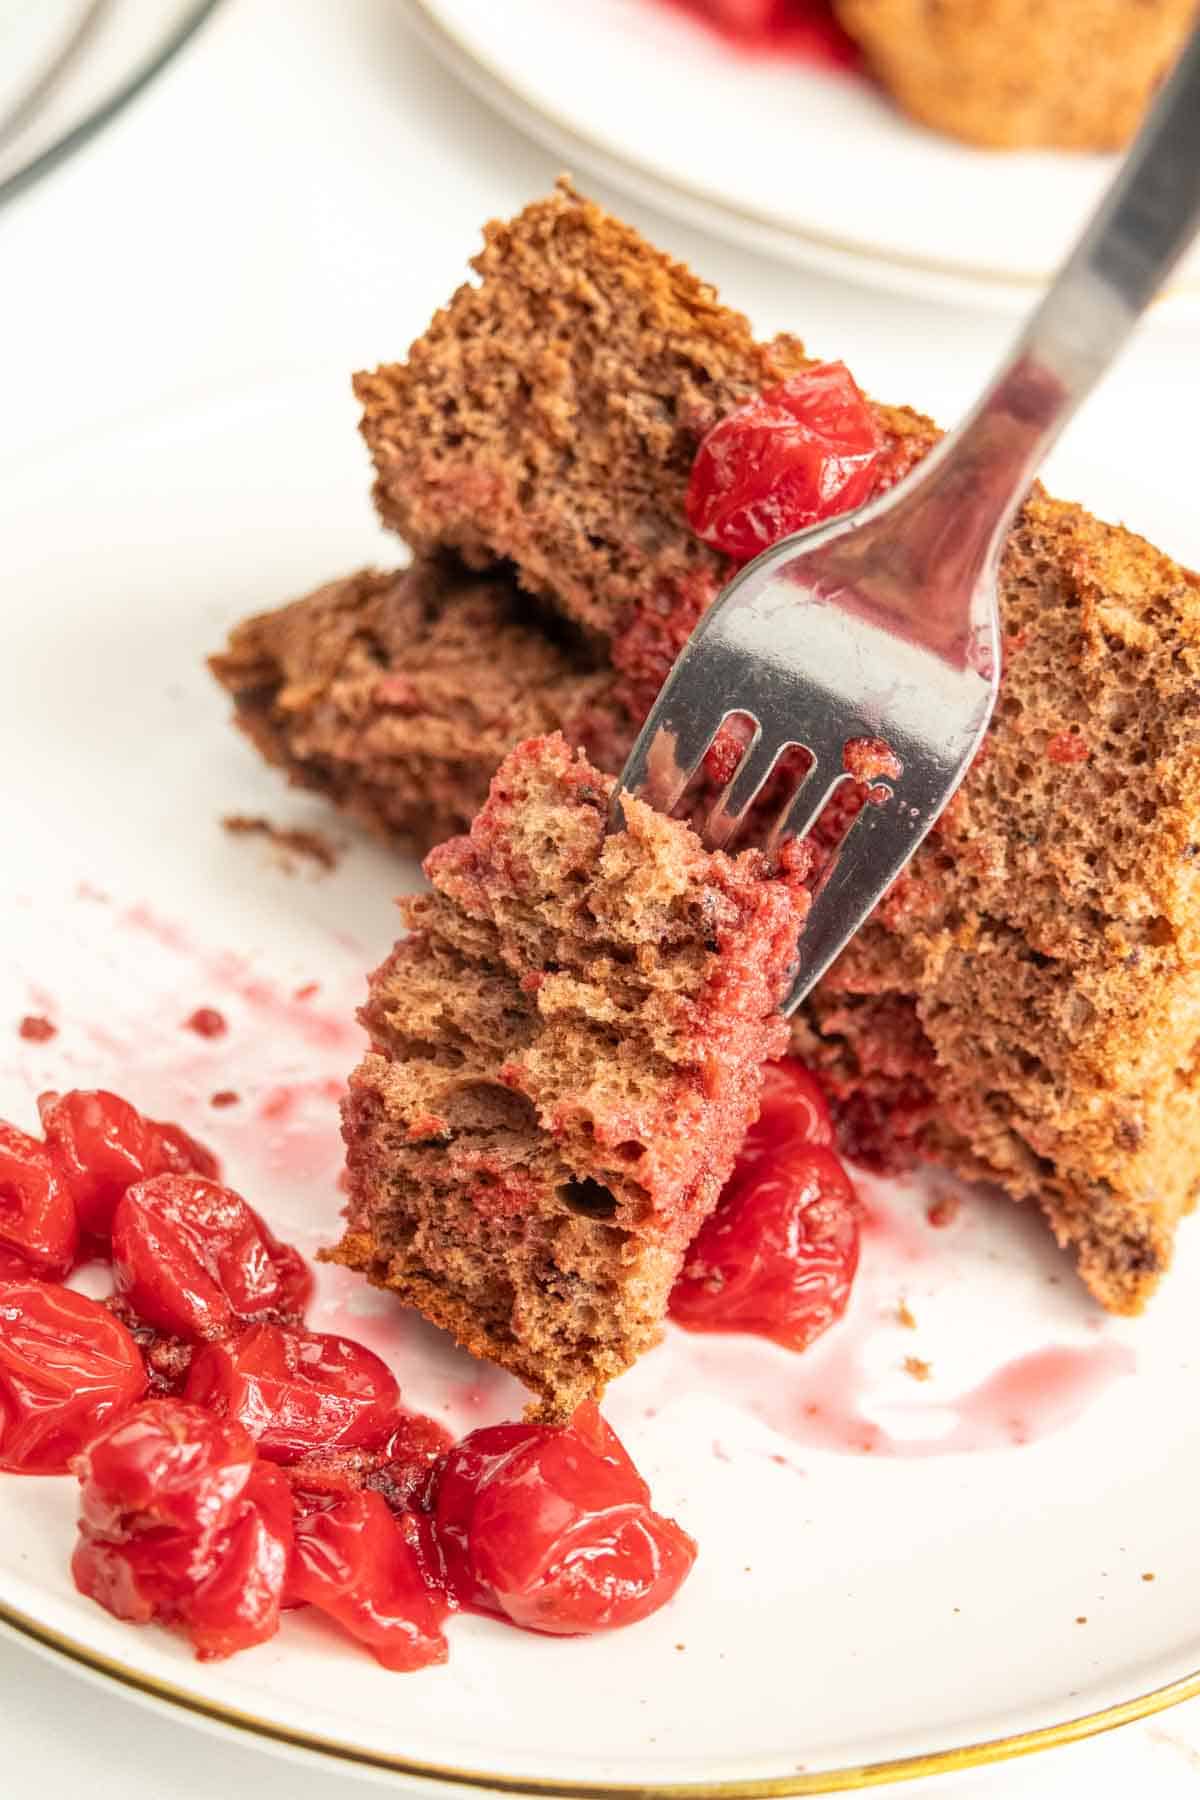 A fork holds a piece of cake with red fruit topping, alongside more fruit and cake pieces on a white plate.